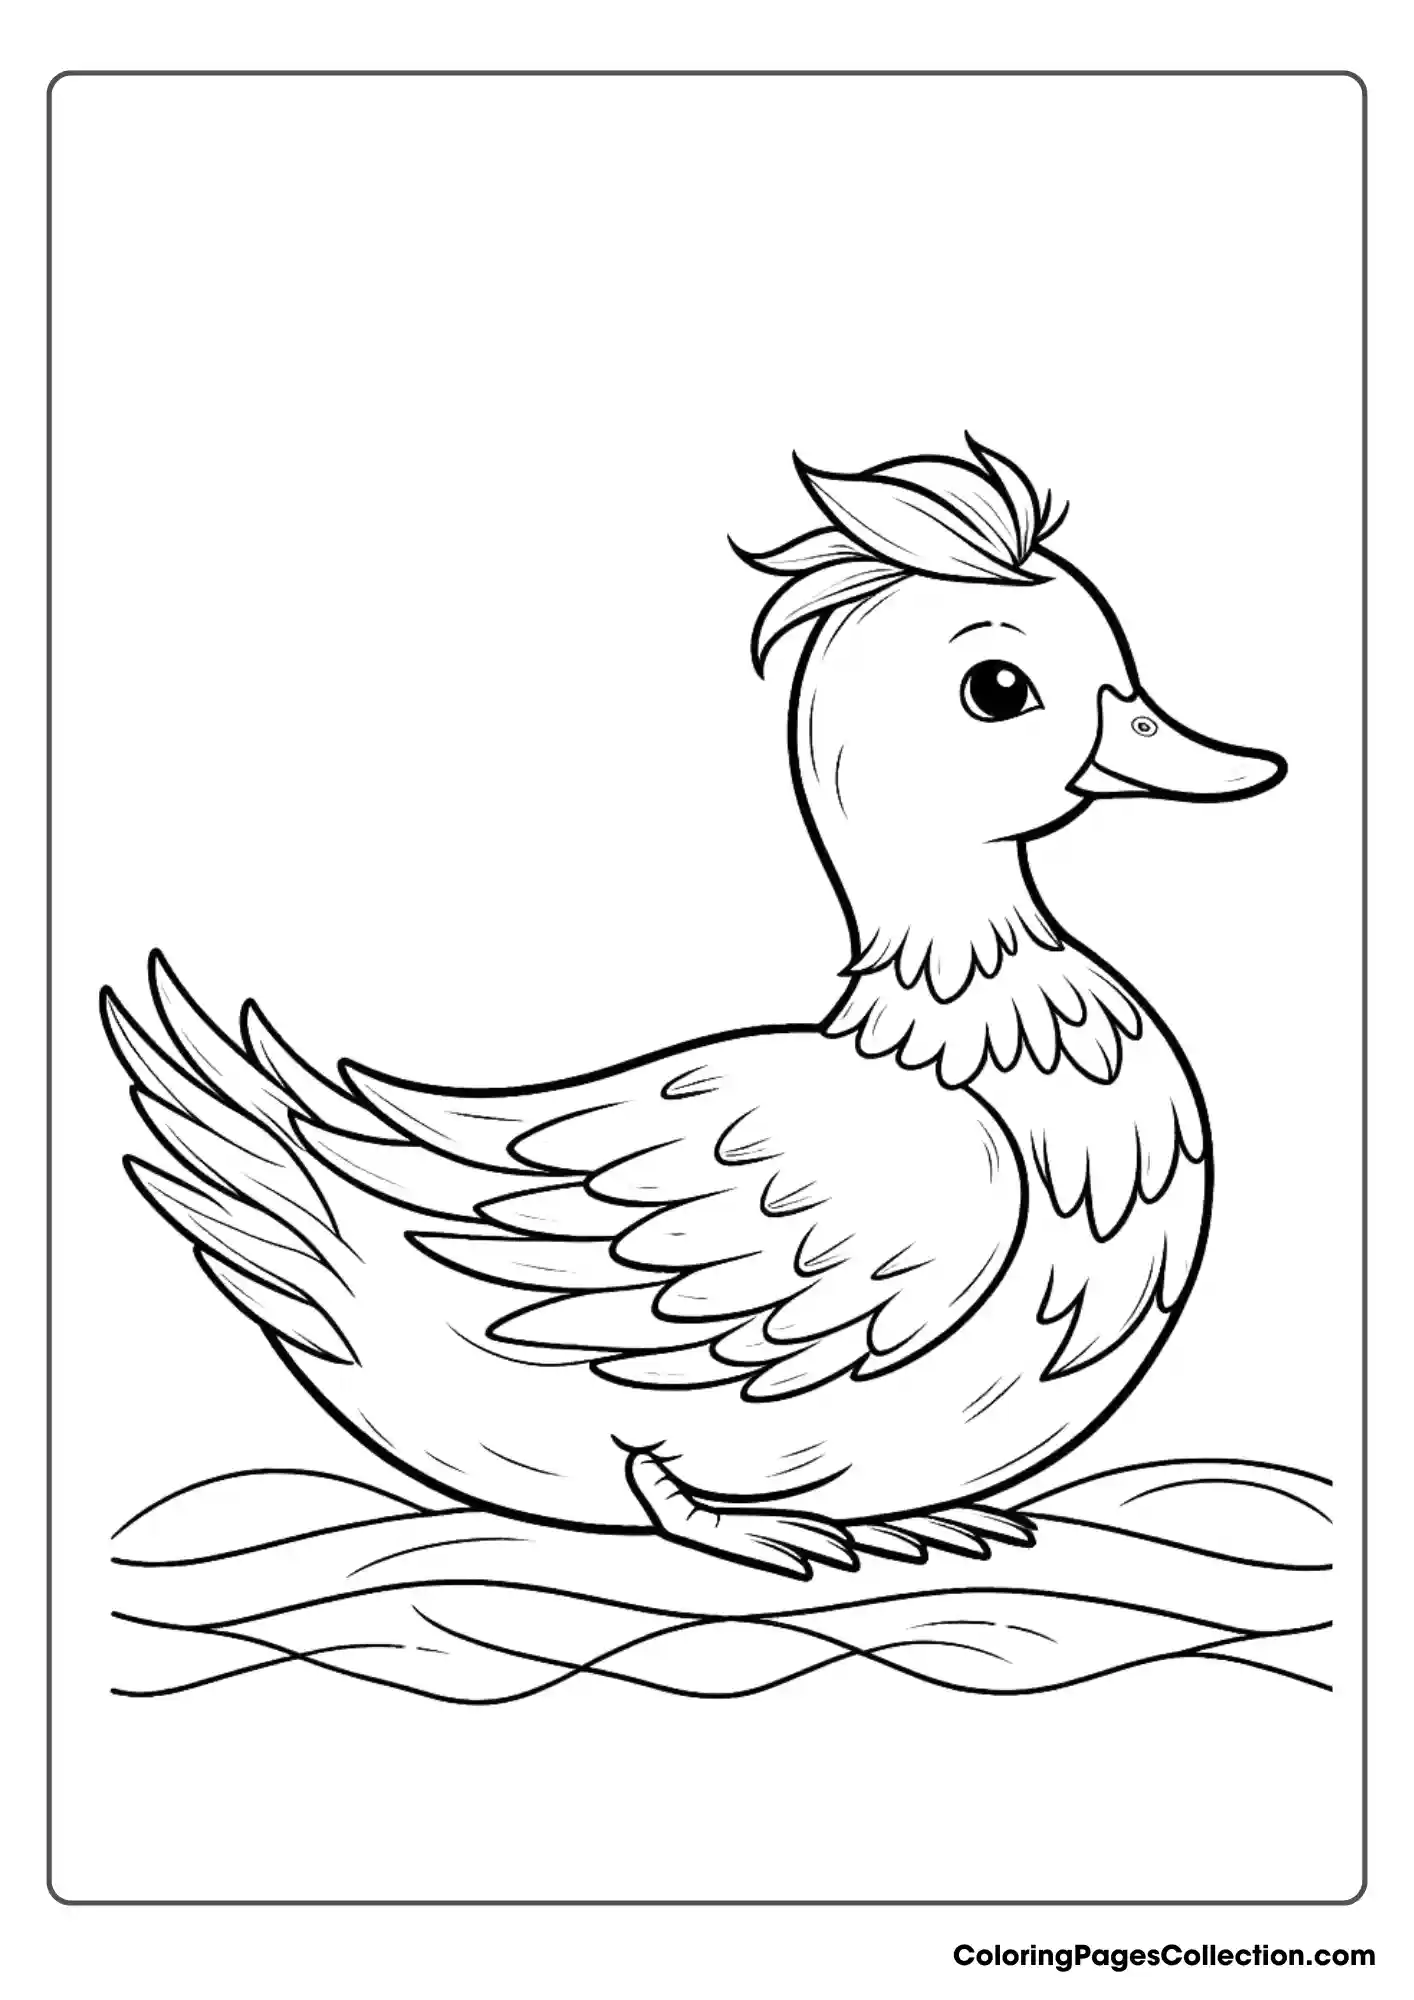 Duck With A Distinct Crest